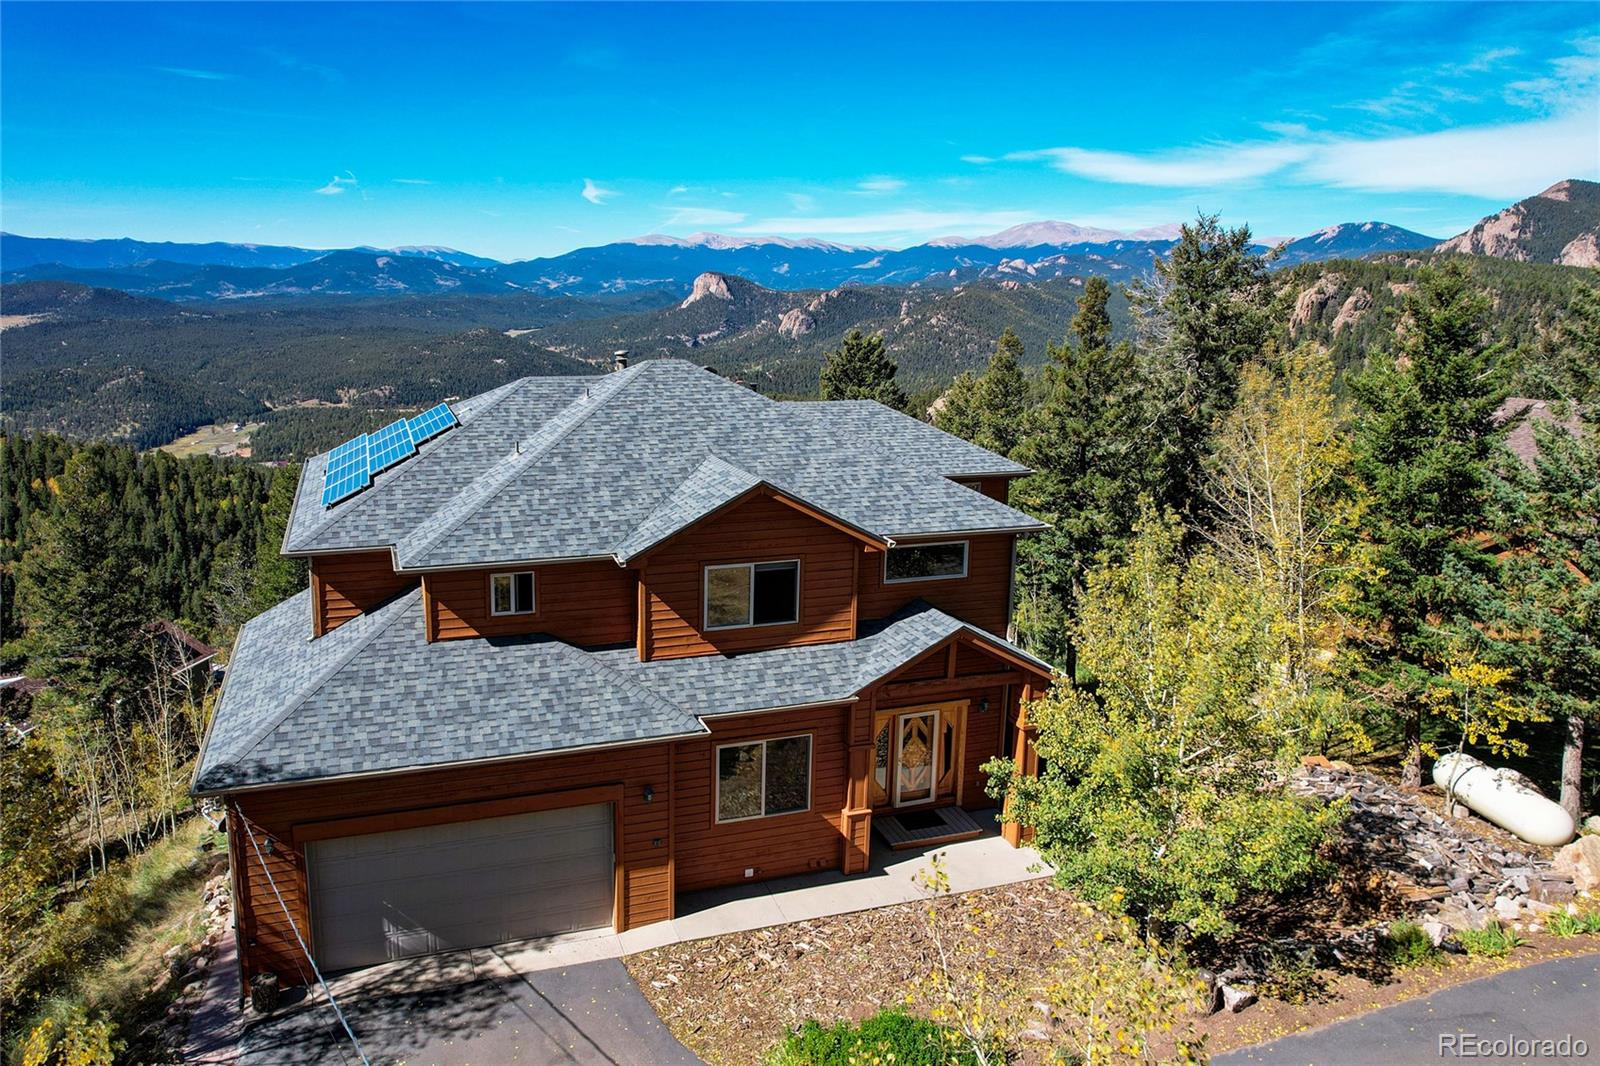 11636  leavenworth drive, Conifer sold home. Closed on 2023-12-21 for $950,000.